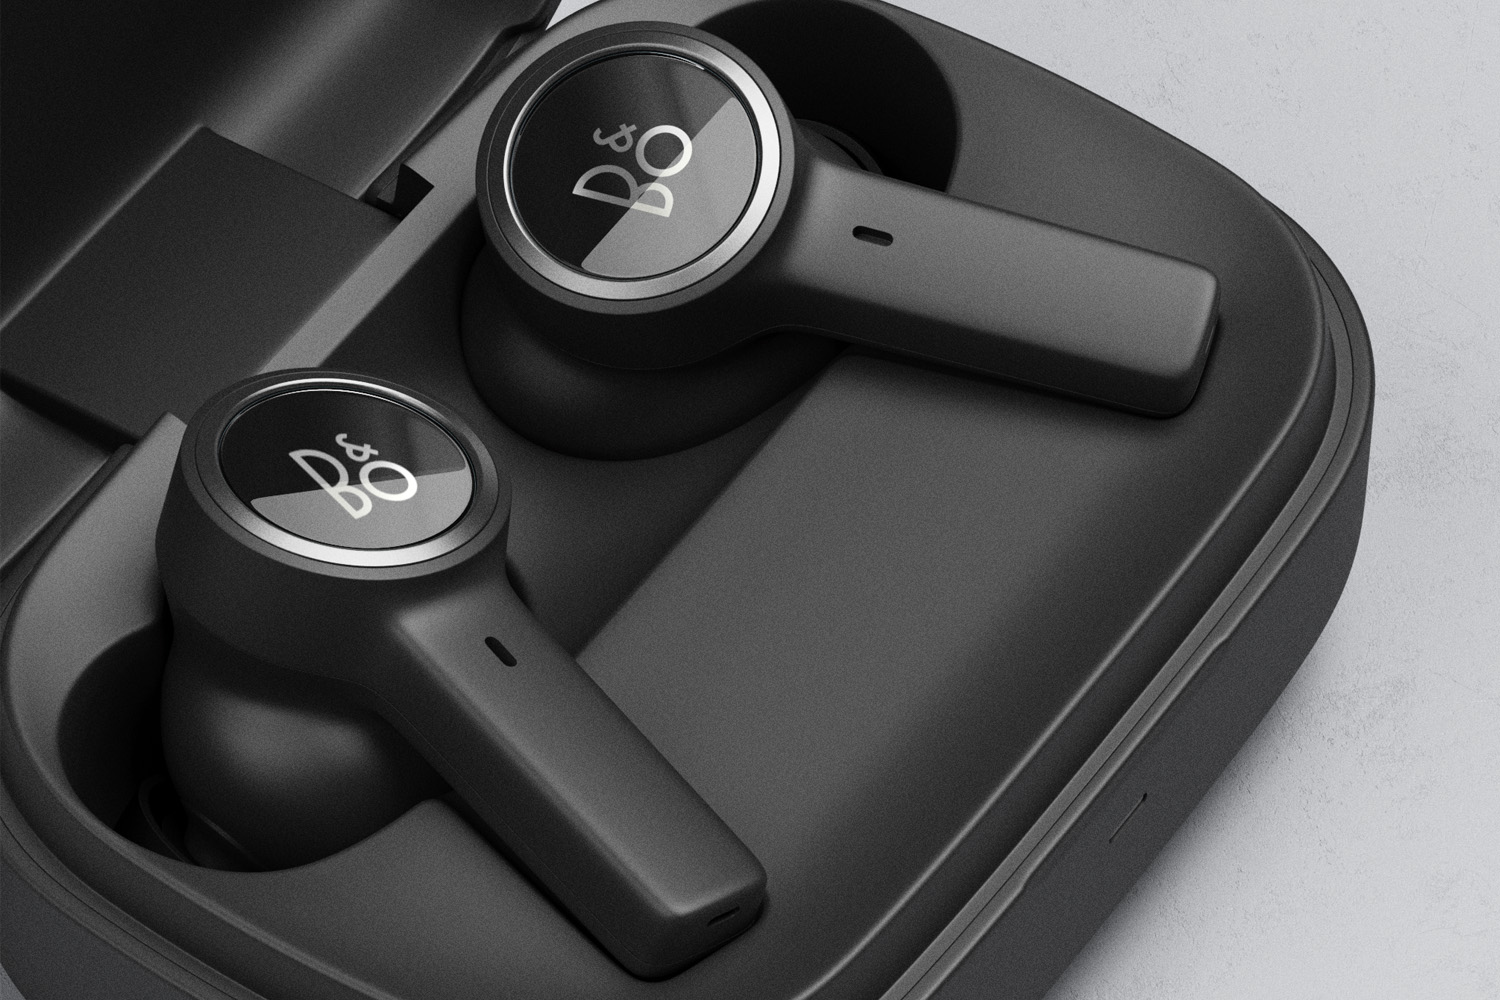 Bang & Olufsen's Beoplay EX earphones are noise-cancelling and fully ...